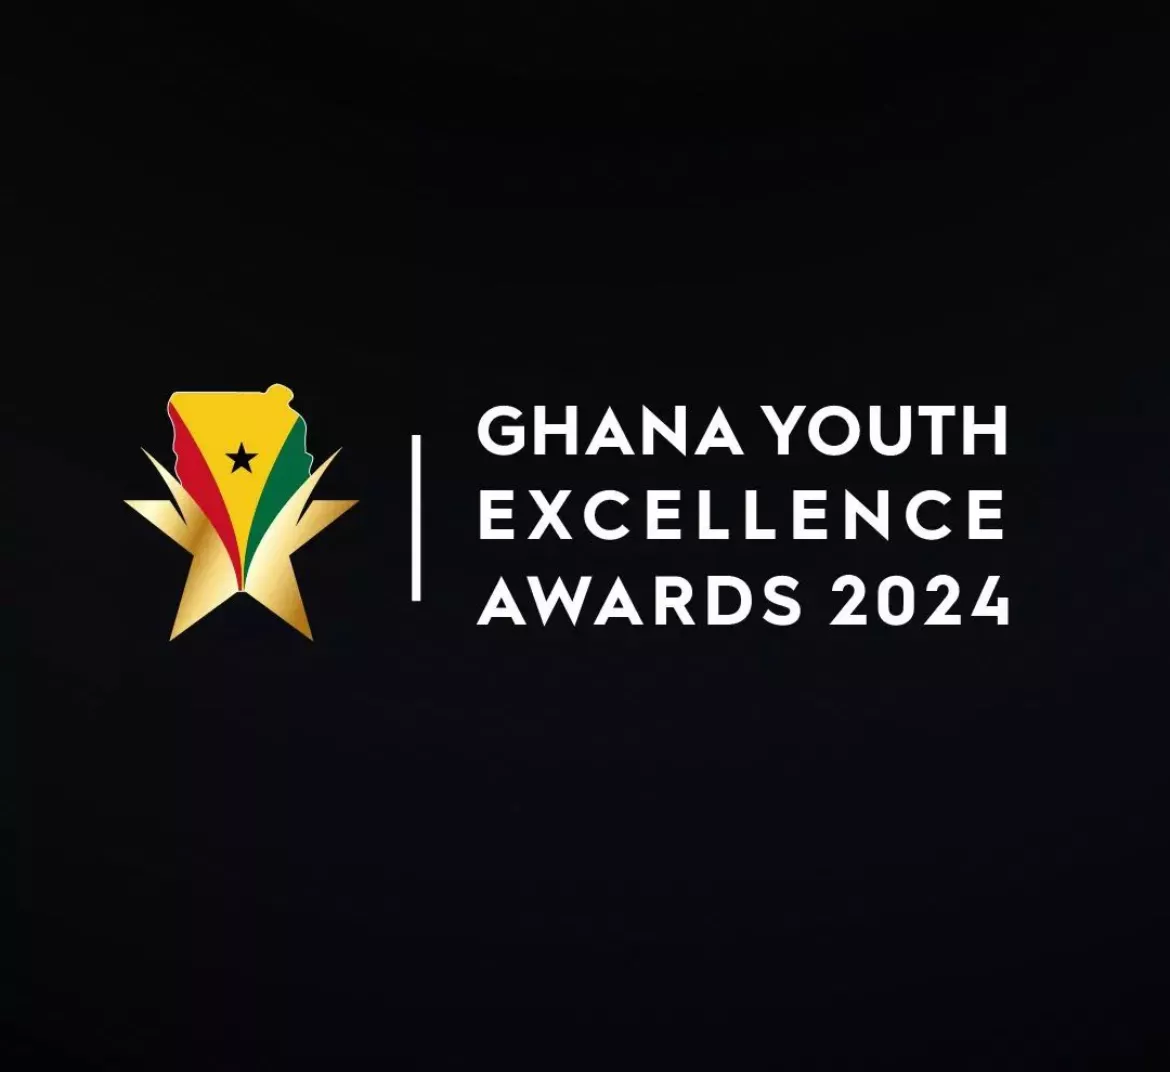 Ghana Youth Excellence Awards 2024